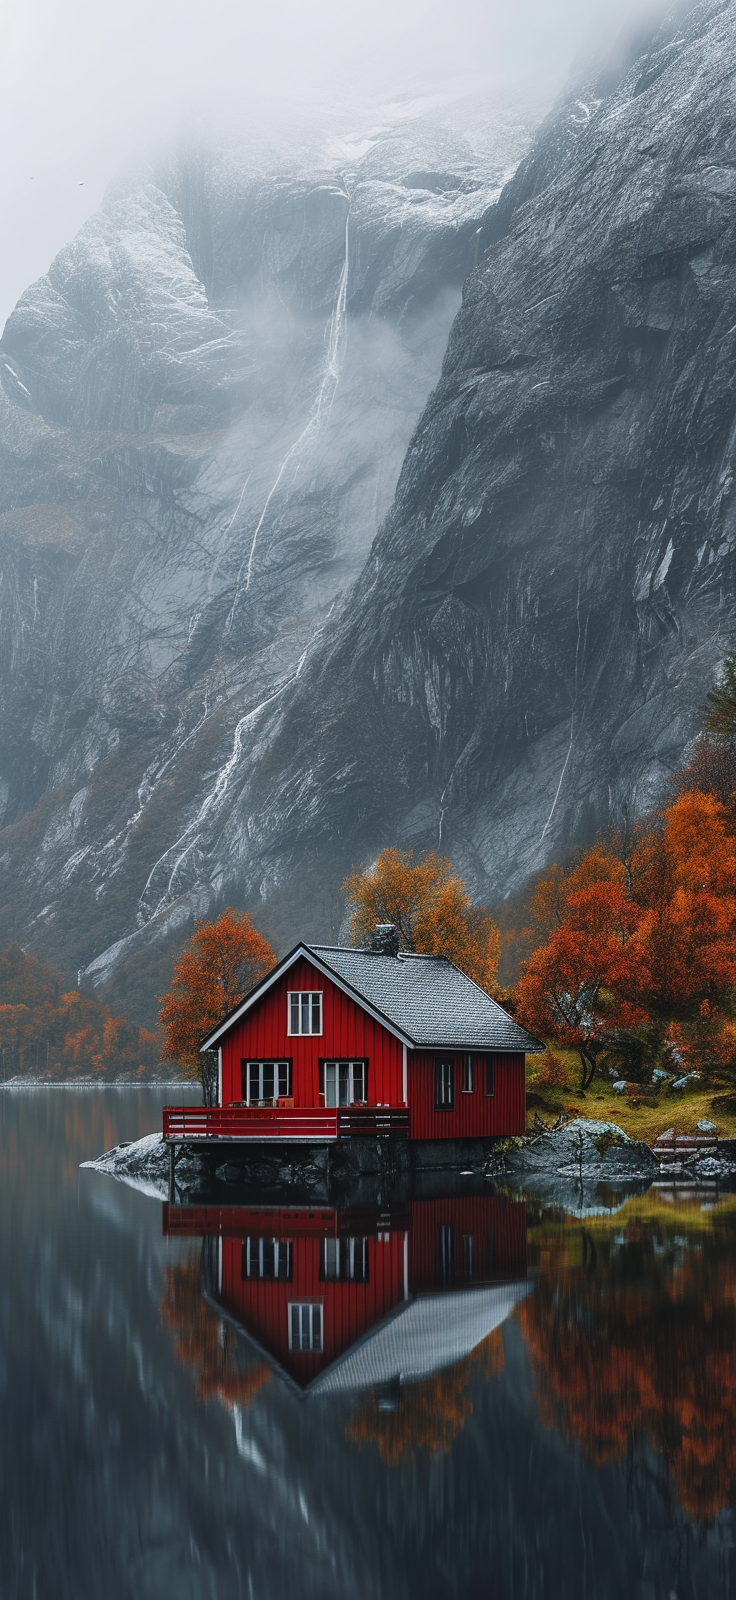 Capture the cozy charm of autumn with this free mobile wallpaper download.